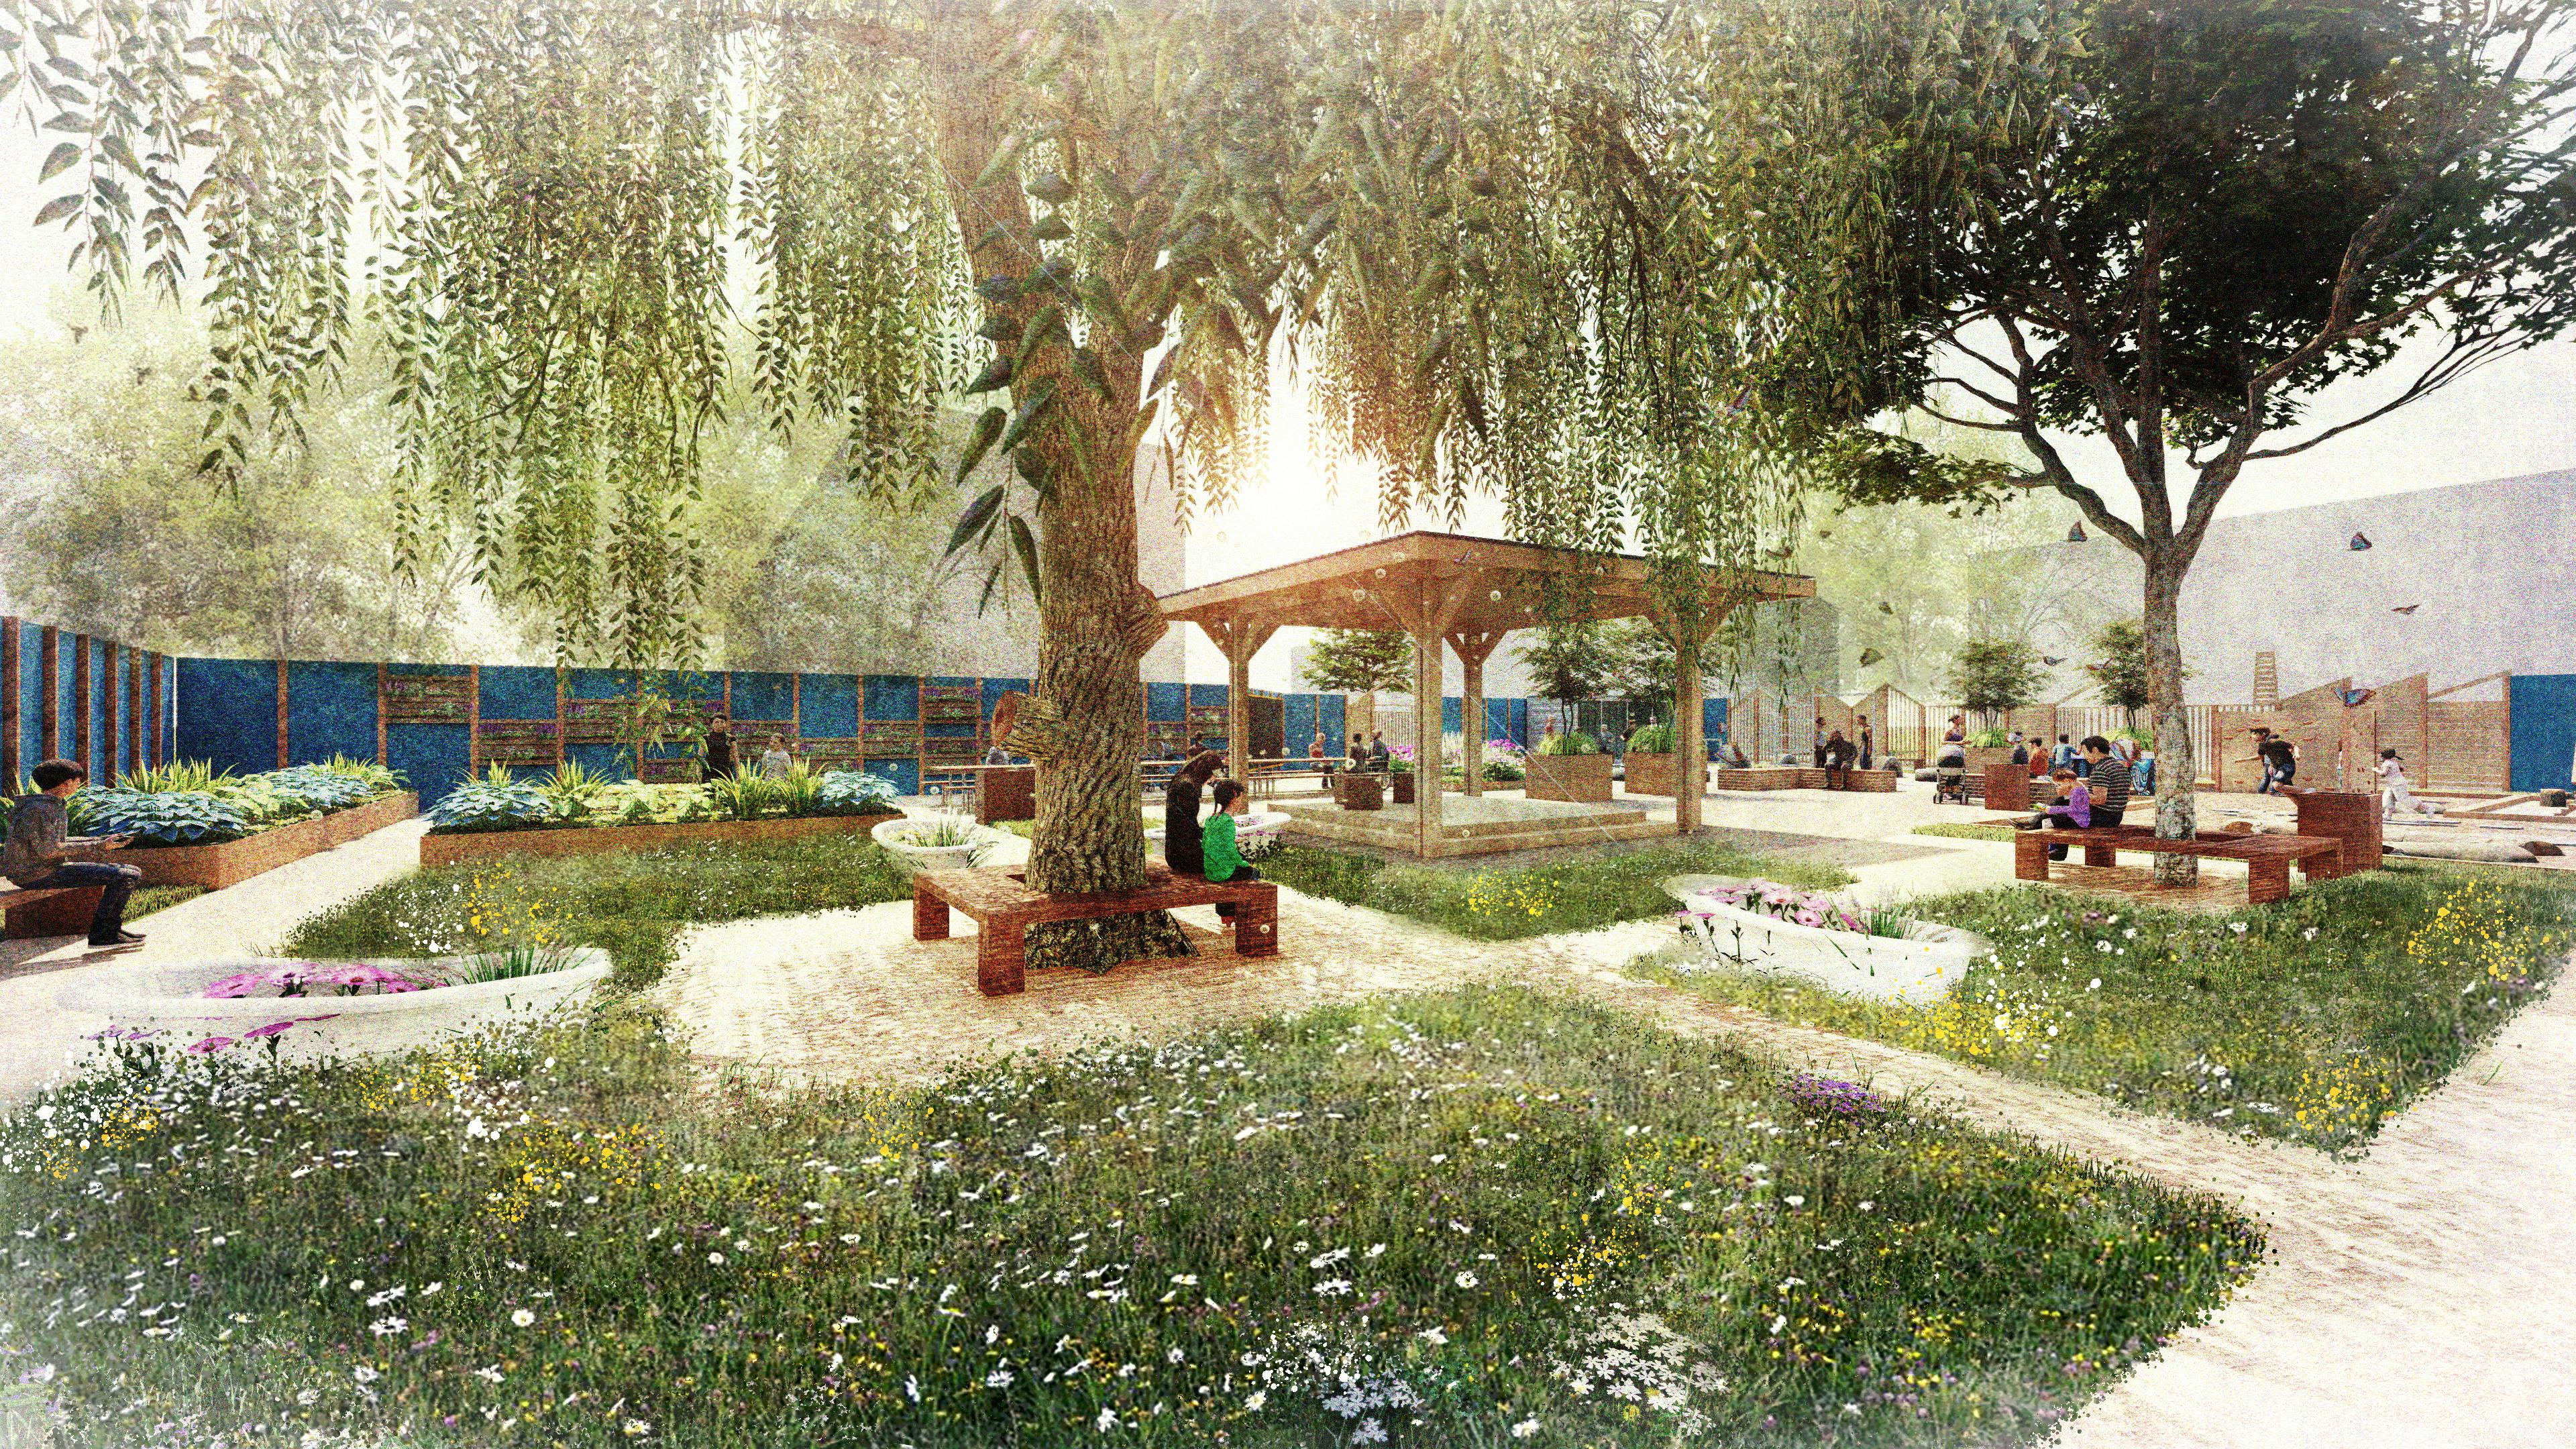 Artists' impression of the park